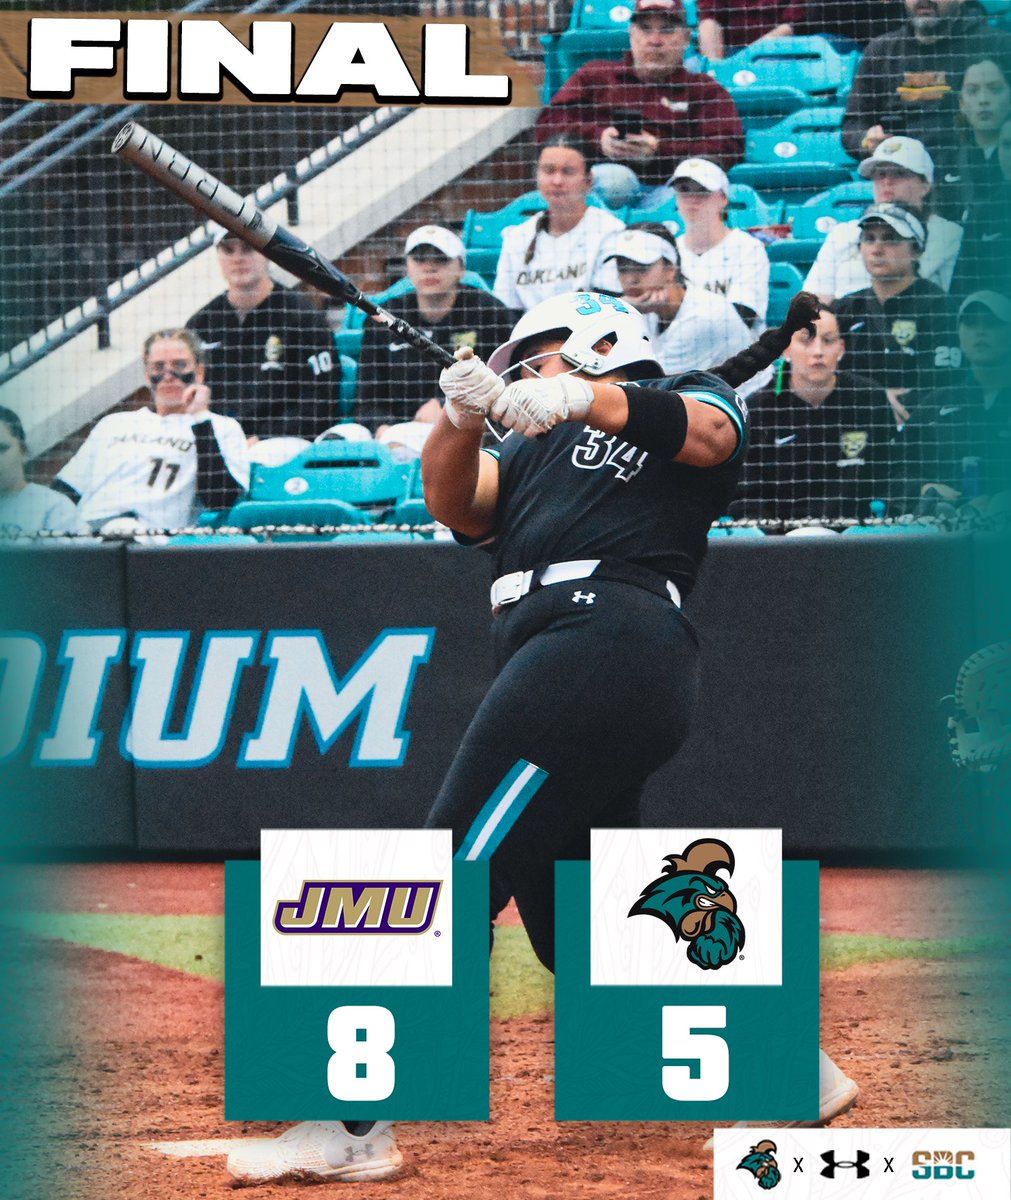 We fall in game 3 but take the series WIN 2-1 💪🏼 #ChantsUp #TEALNATION